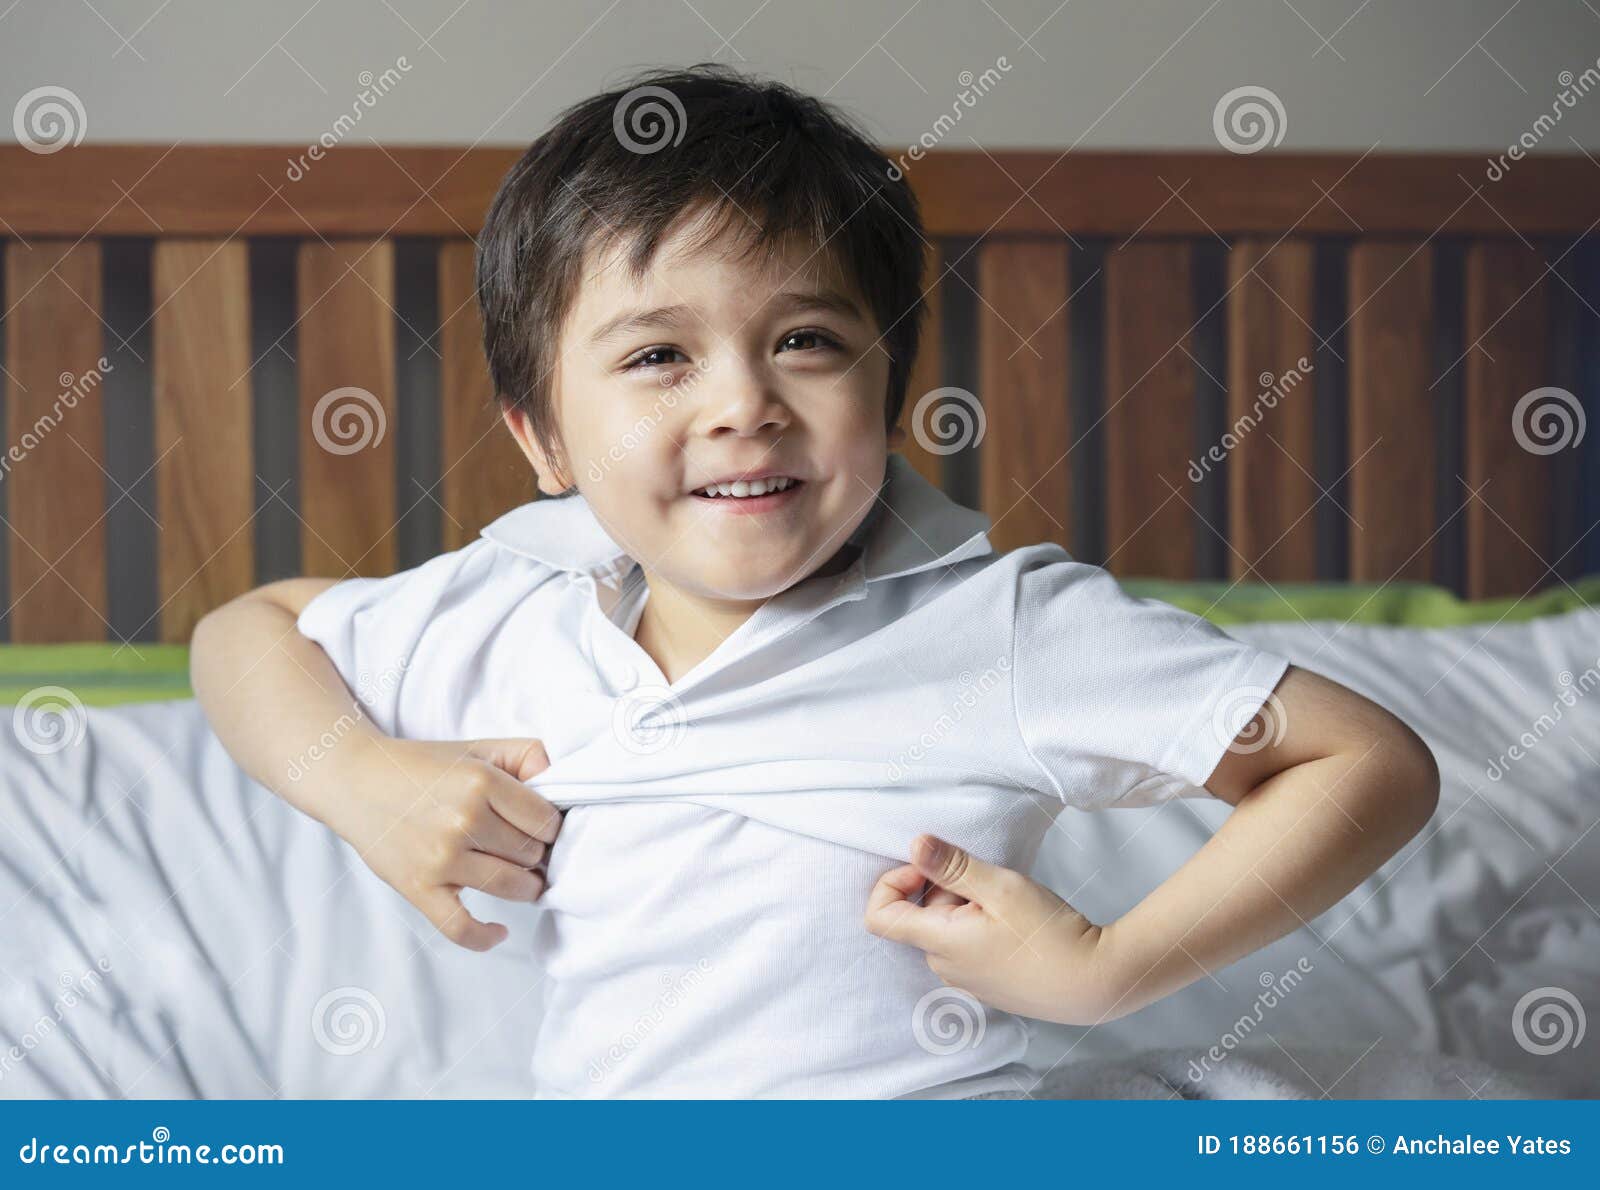 school boy sitting in bed and try to wearing his cloth with smiling face,cute kid boy getting dressed and get ready for school,